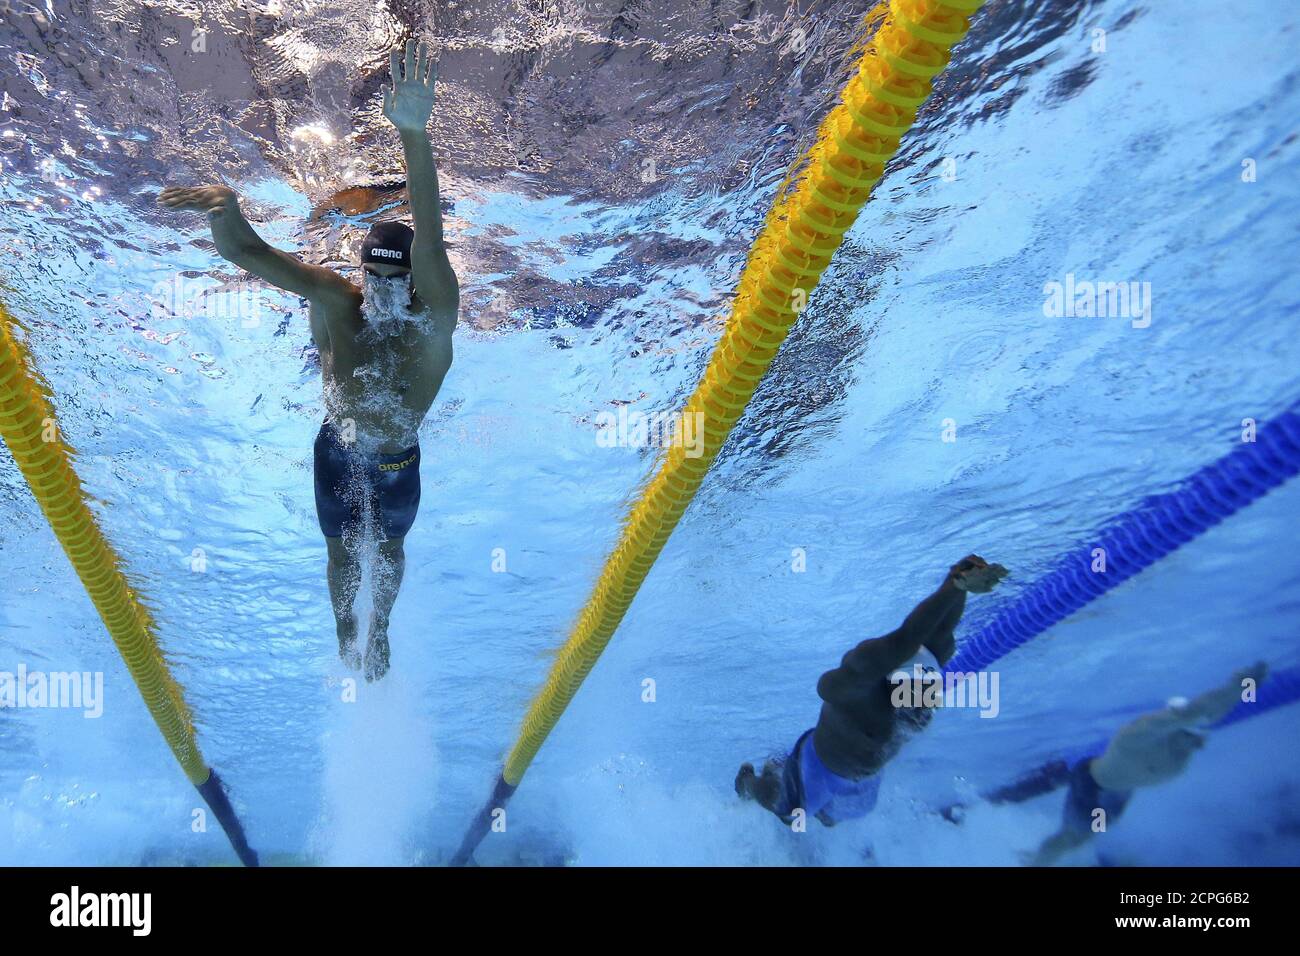 2018 European Championships - 4 x 100m Freestyle Relay Mixed Final -  Tollcross International Swimming Centre, Glasgow, Britain - August 8, 2018  - Grinev Vladislav of Russia competes. REUTERS/Stefan Wermuth Stock Photo -  Alamy